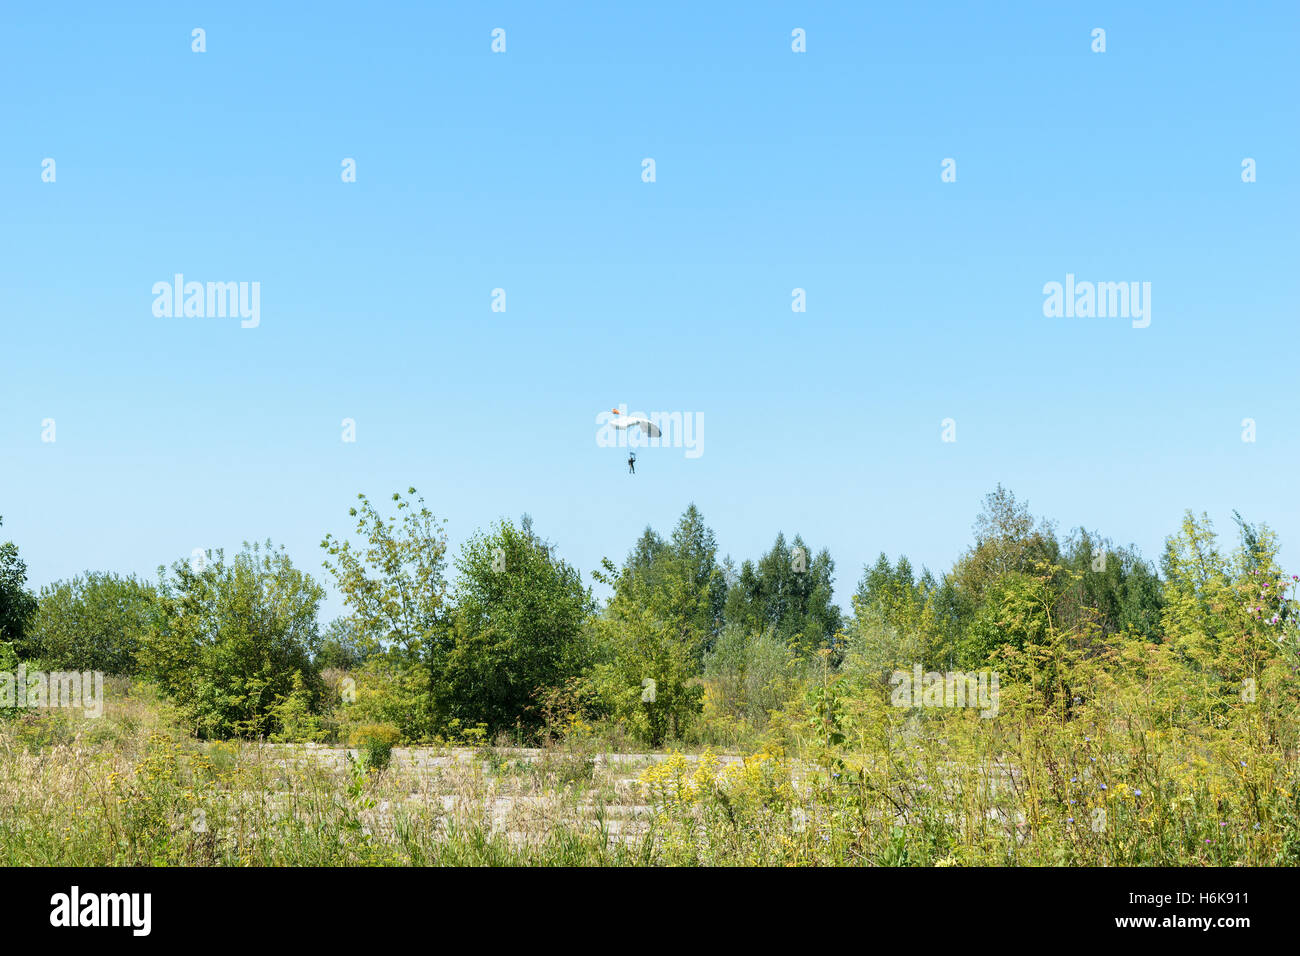 Paratroopers falling to earth on blue clear sky background Stock Photo